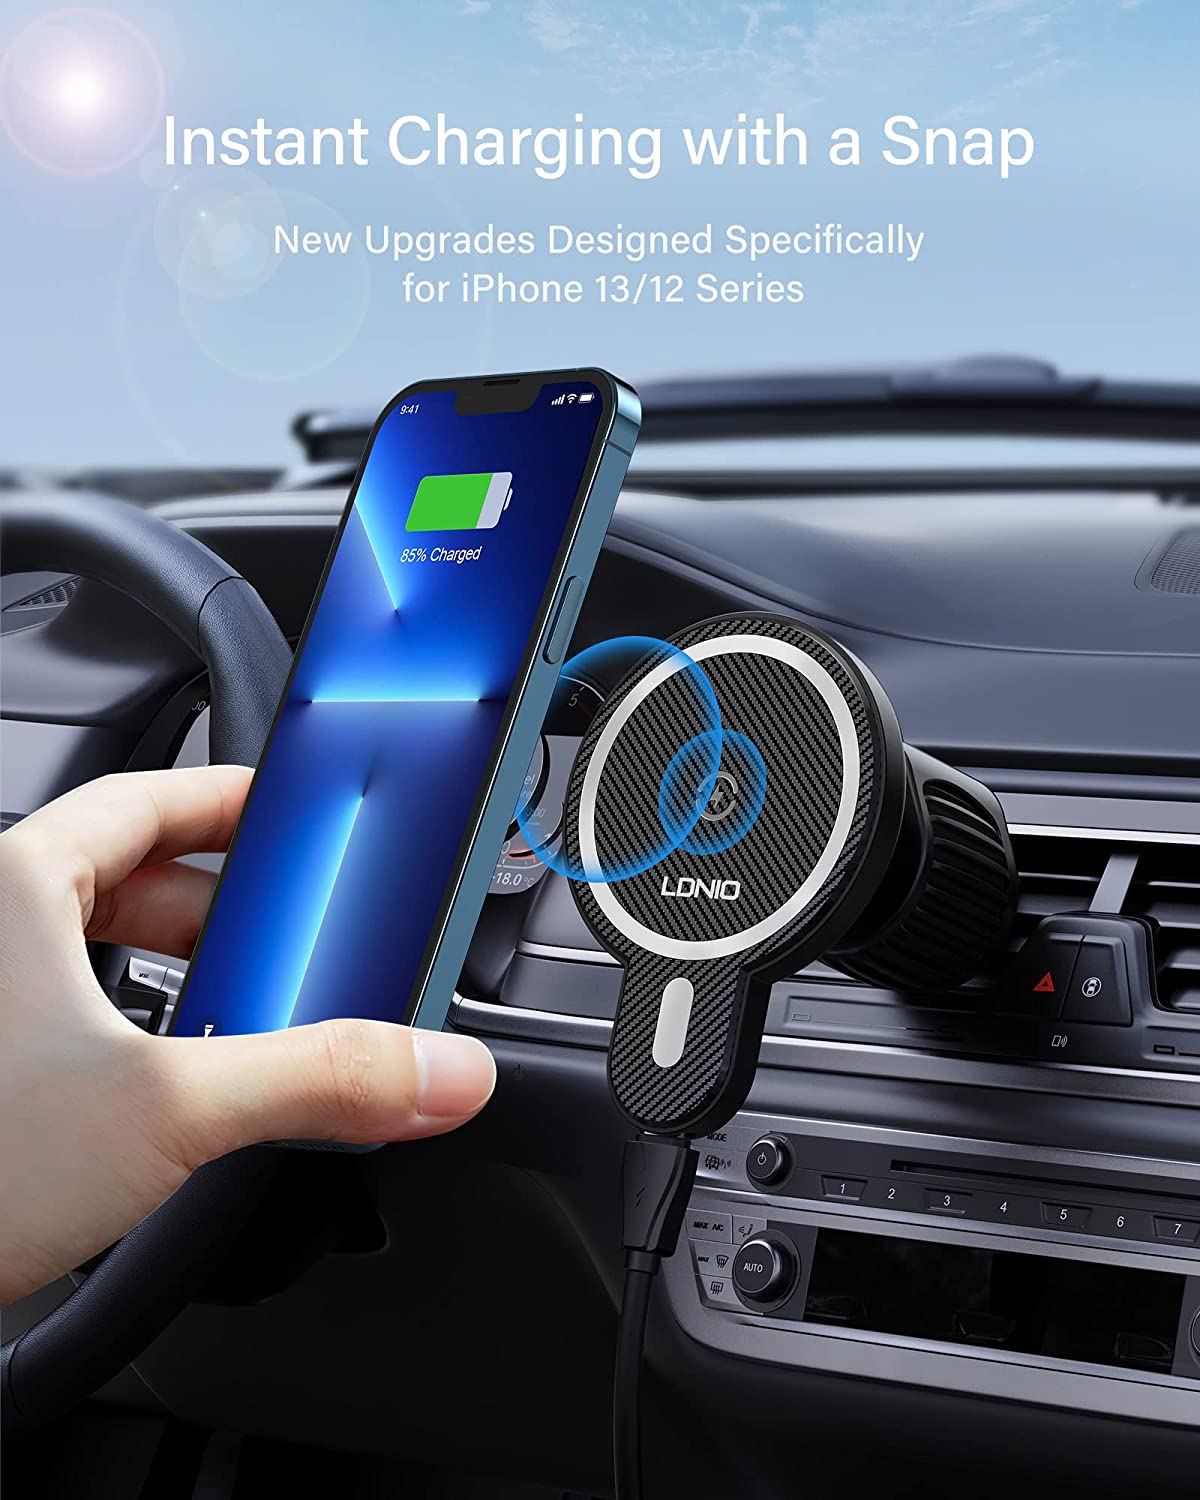 LDNIO 15W Magnetic Electric 2 In 1 Wireless Charger & Car Holder - Black (MA20)